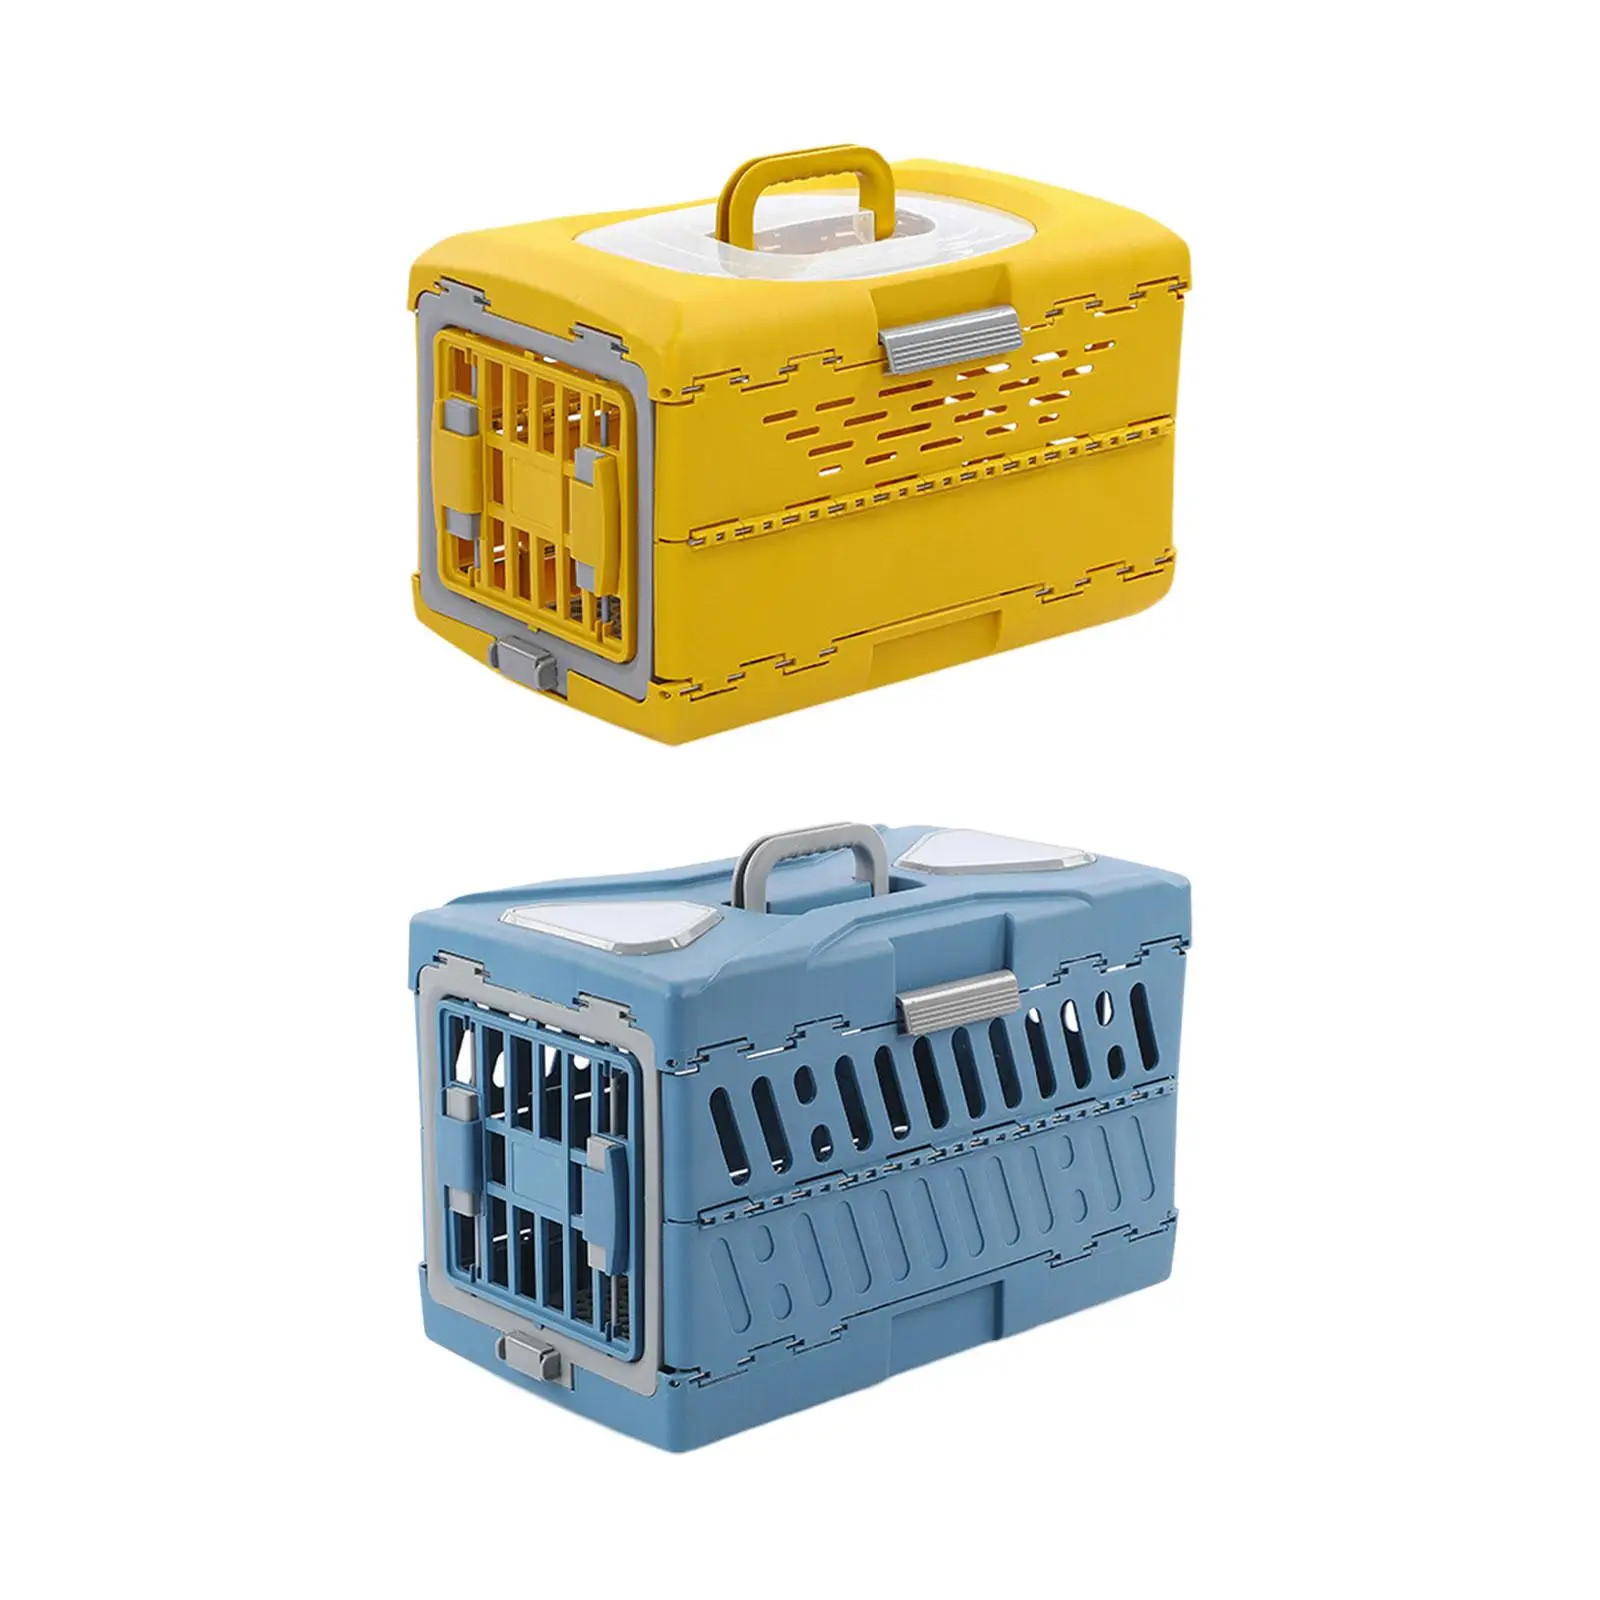 Collapsible Puppy Crate Heavy Duty Foldable Portable Dog Kennel Cat Travel Cage for Rabbit Cat Kitten Puppy Small Animals